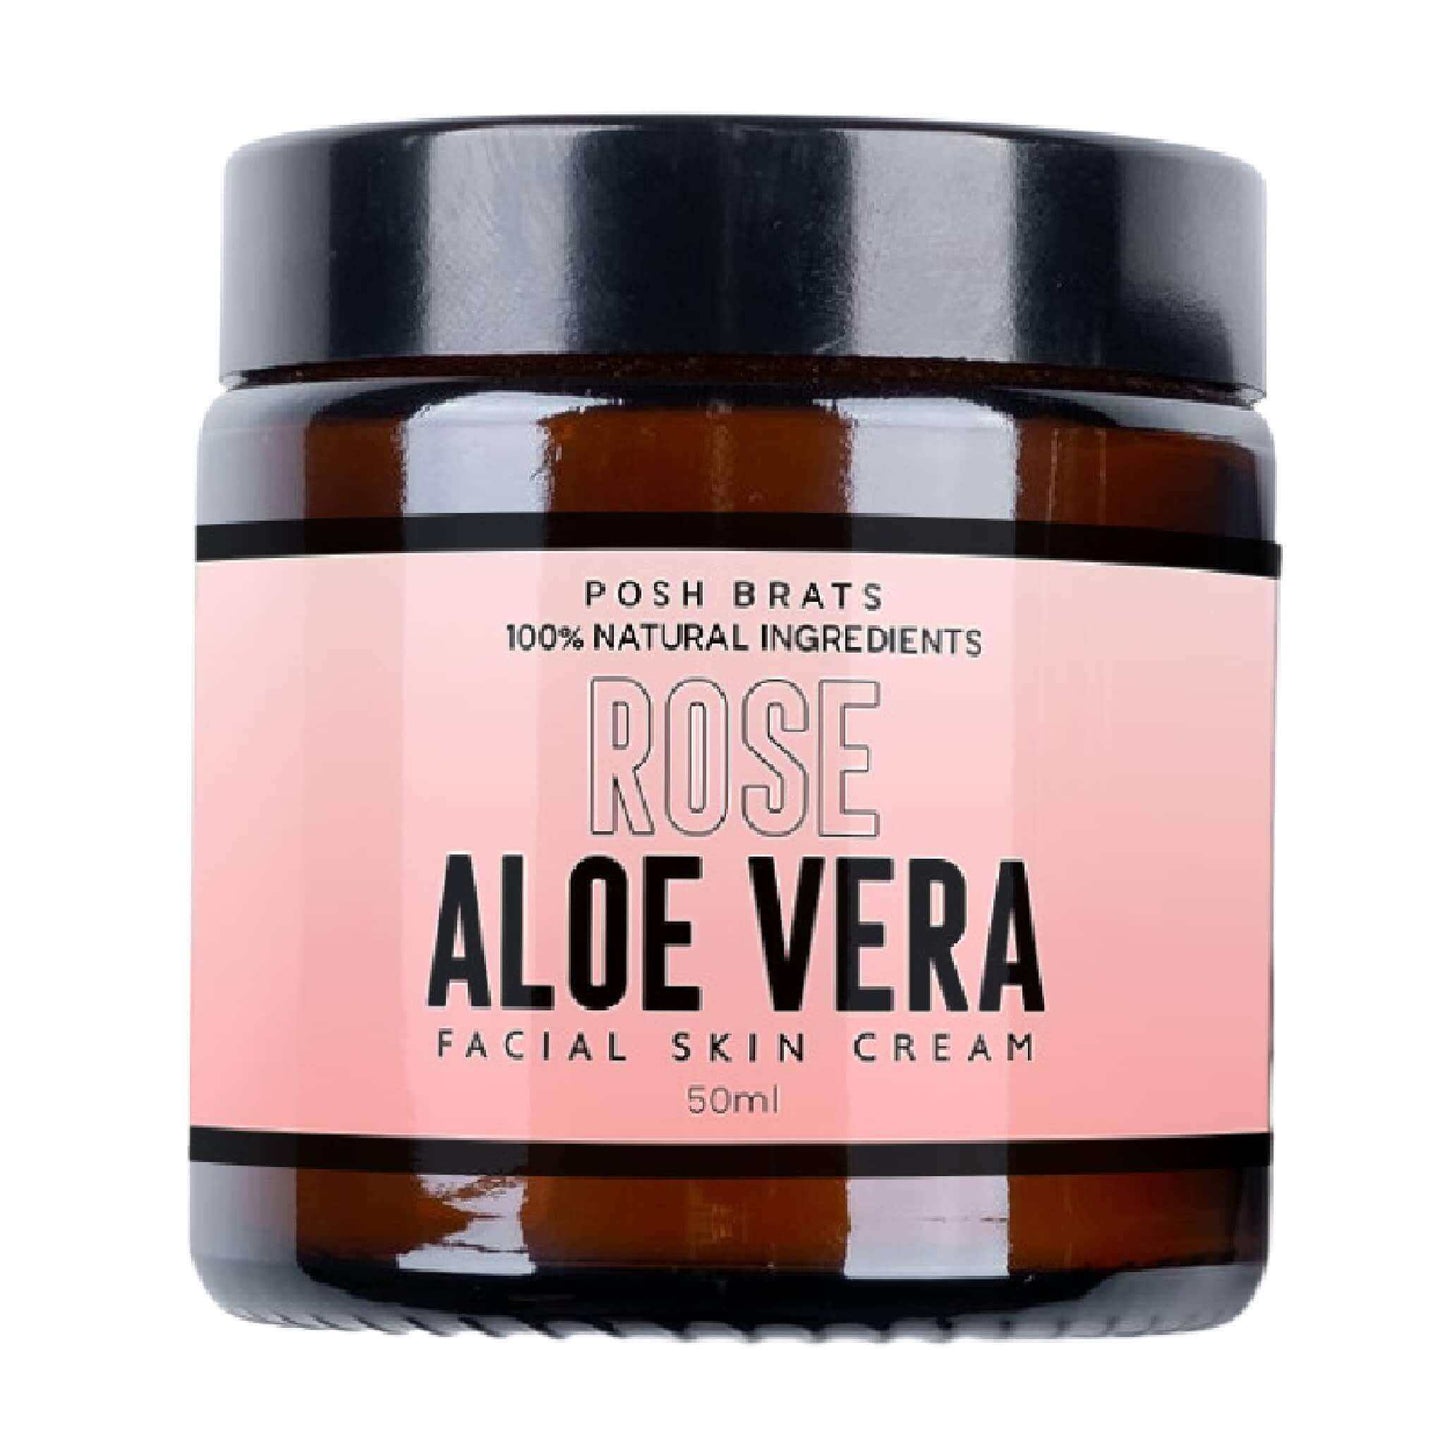 Experience the magic of Rose Aloe Vera Cream - our unique aromatherapy facial skin solution. Feel the difference today!